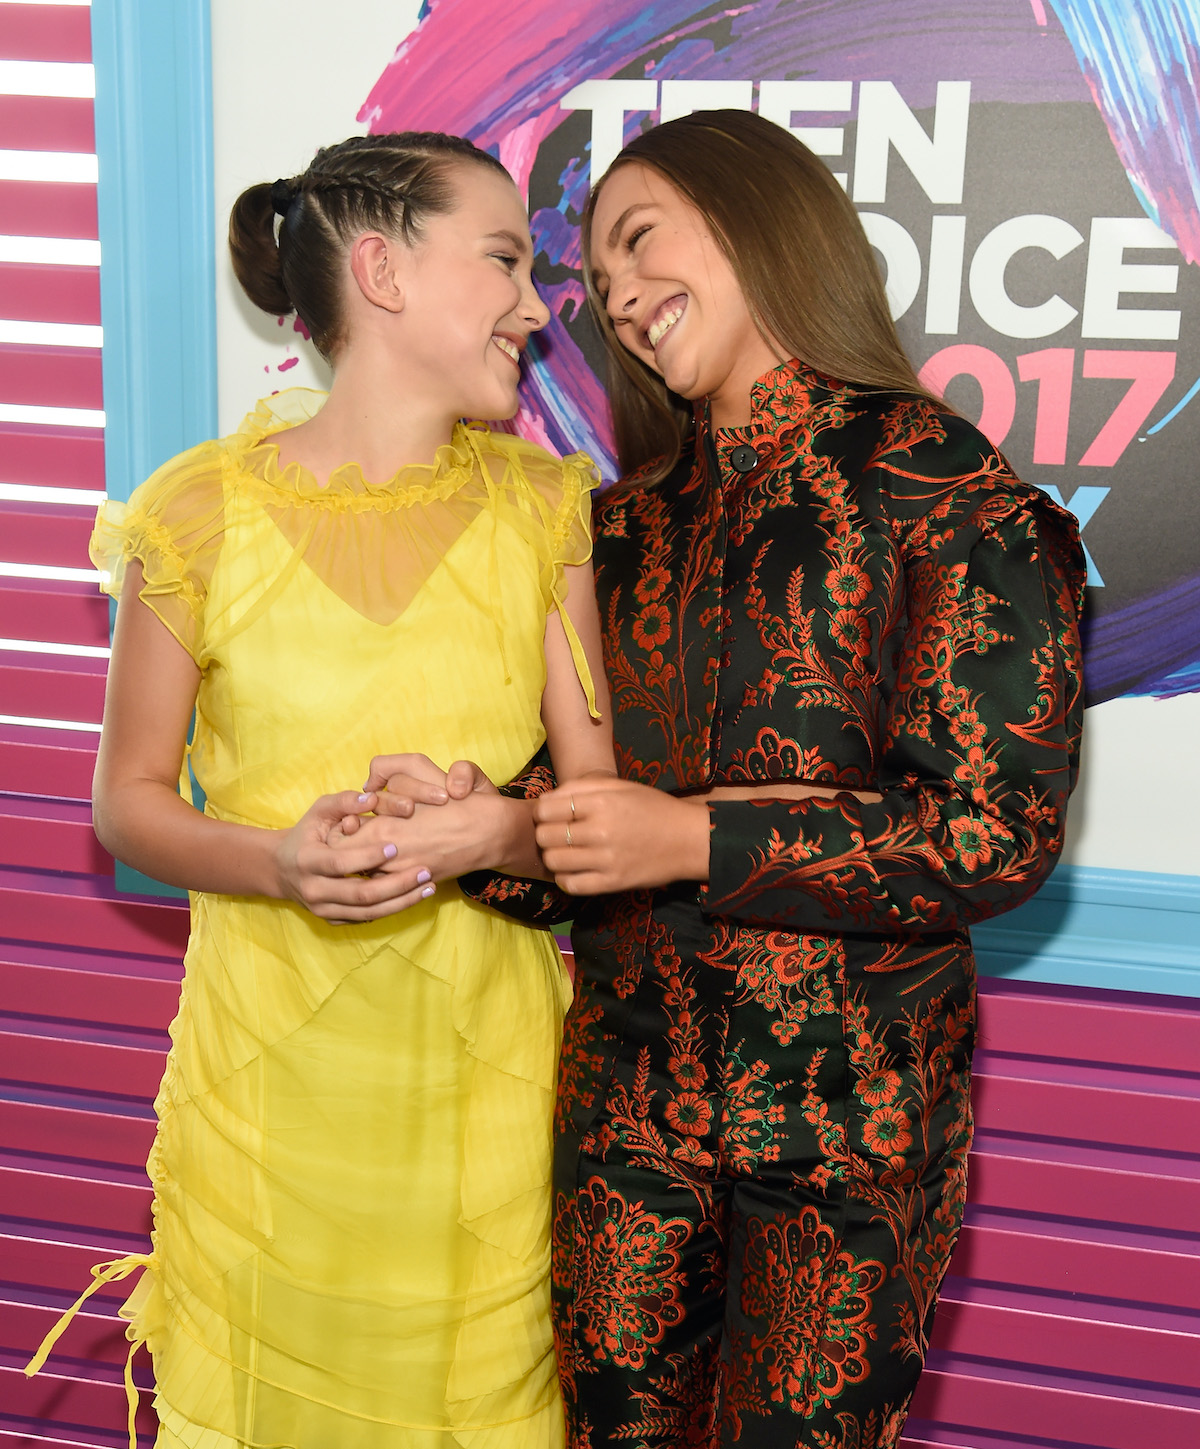 Millie Bobby Brown and Maddie Ziegler smile at each other on the red carpet